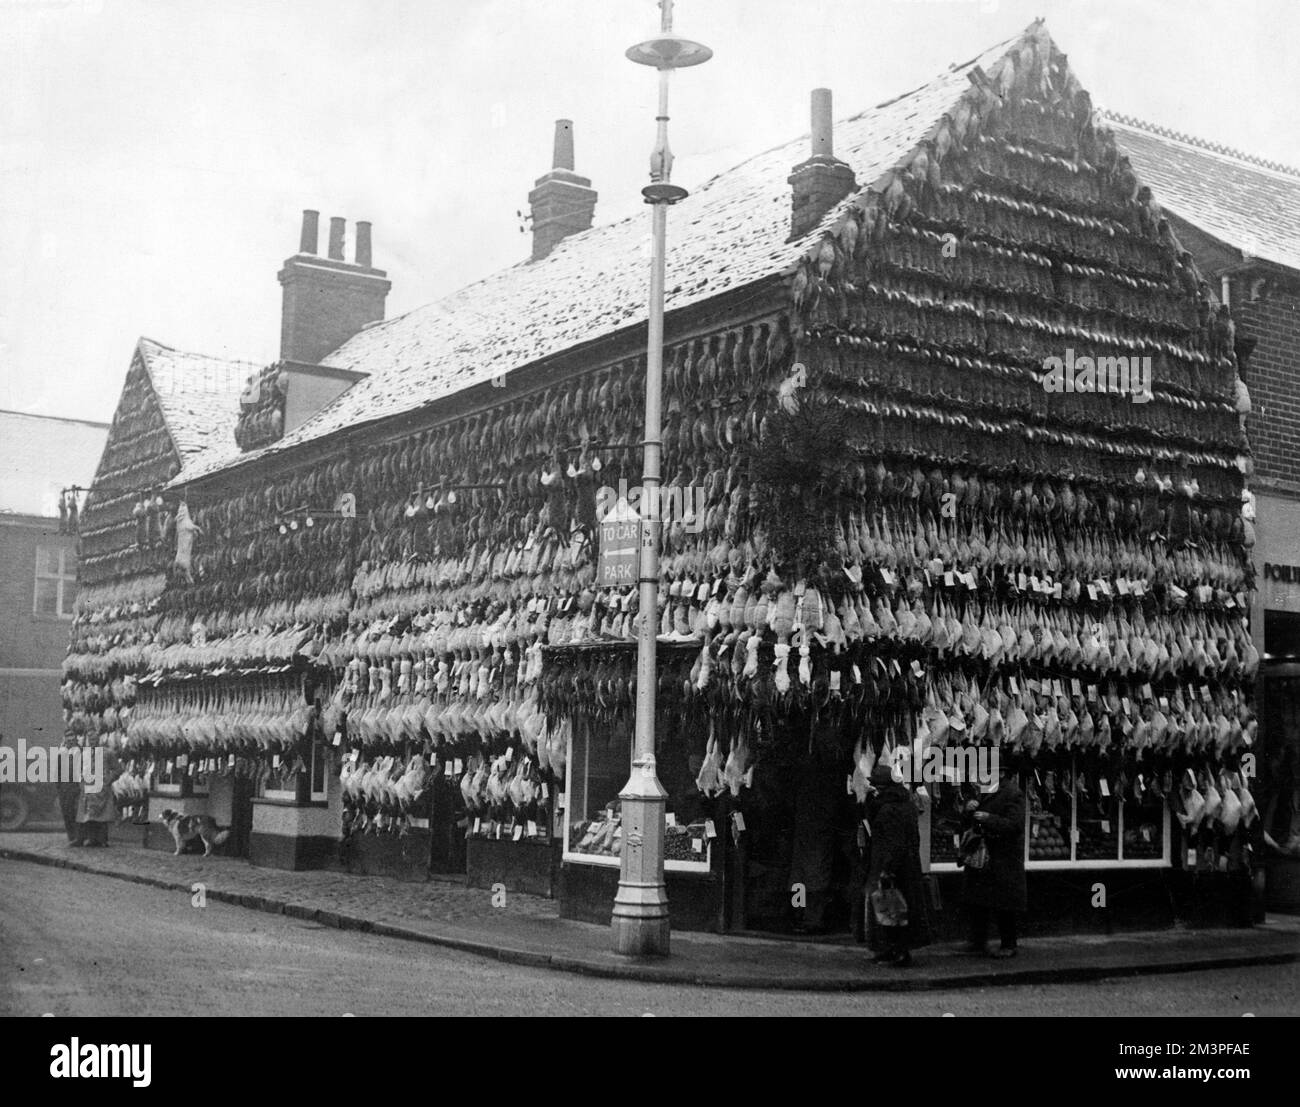 A spectacular display of turkeys hanging outside a butcher's shop in High Wycombe, Buckinghamshire.  They are so numerous (and are joined by rabbits and a lone pig) they literally cover the entire building.     Date: c.1930 Stock Photo